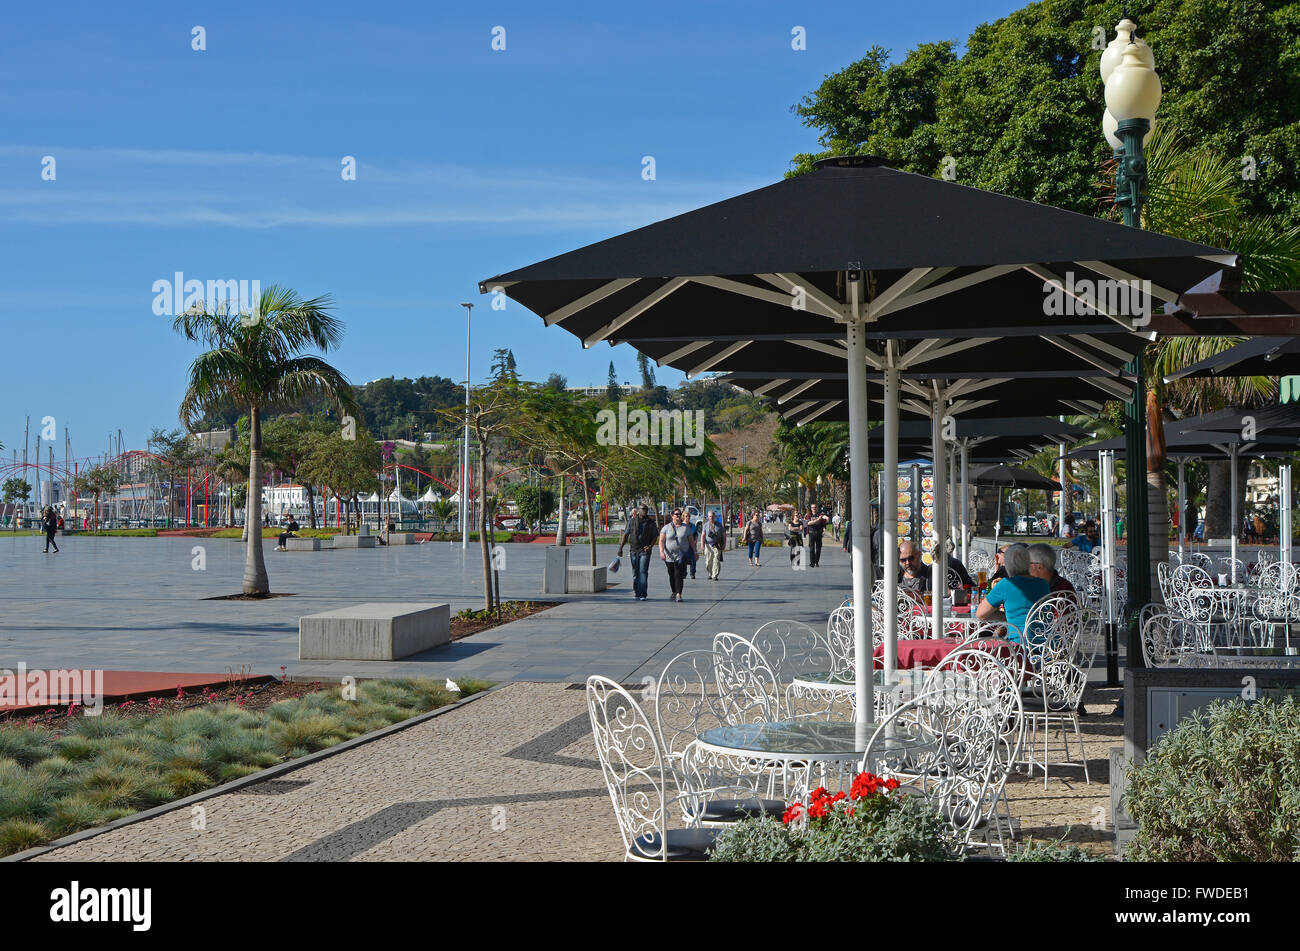 Cafe and people strolling on seafront promenade in Funchal, Madeira, Portugal Stock Photo